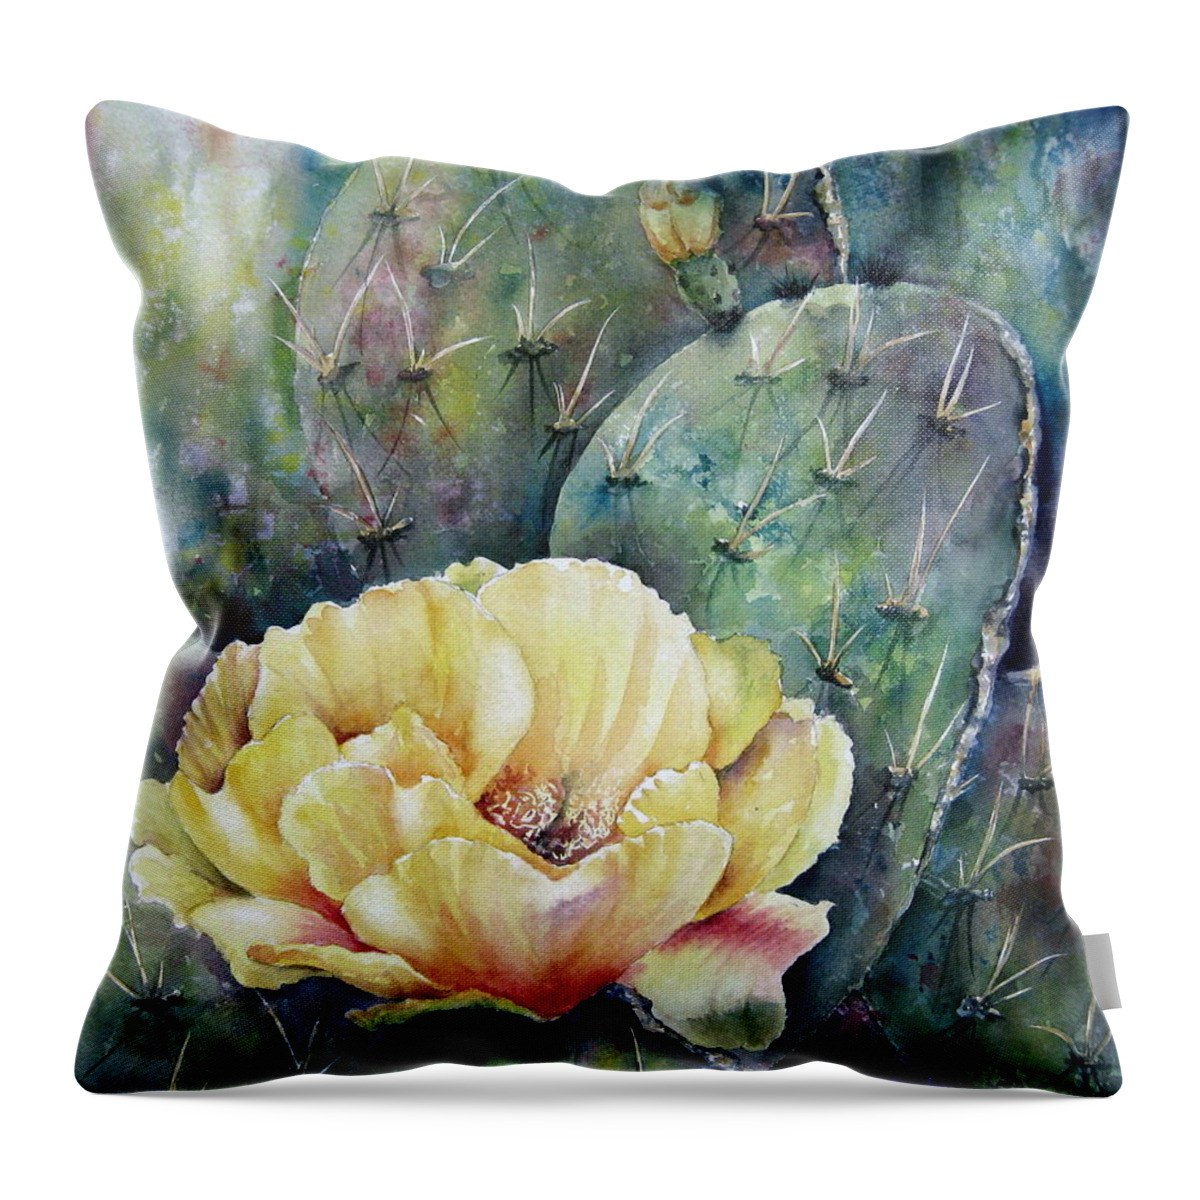 Flower Throw Pillow featuring the painting Prickly Blossom by Mary McCullah